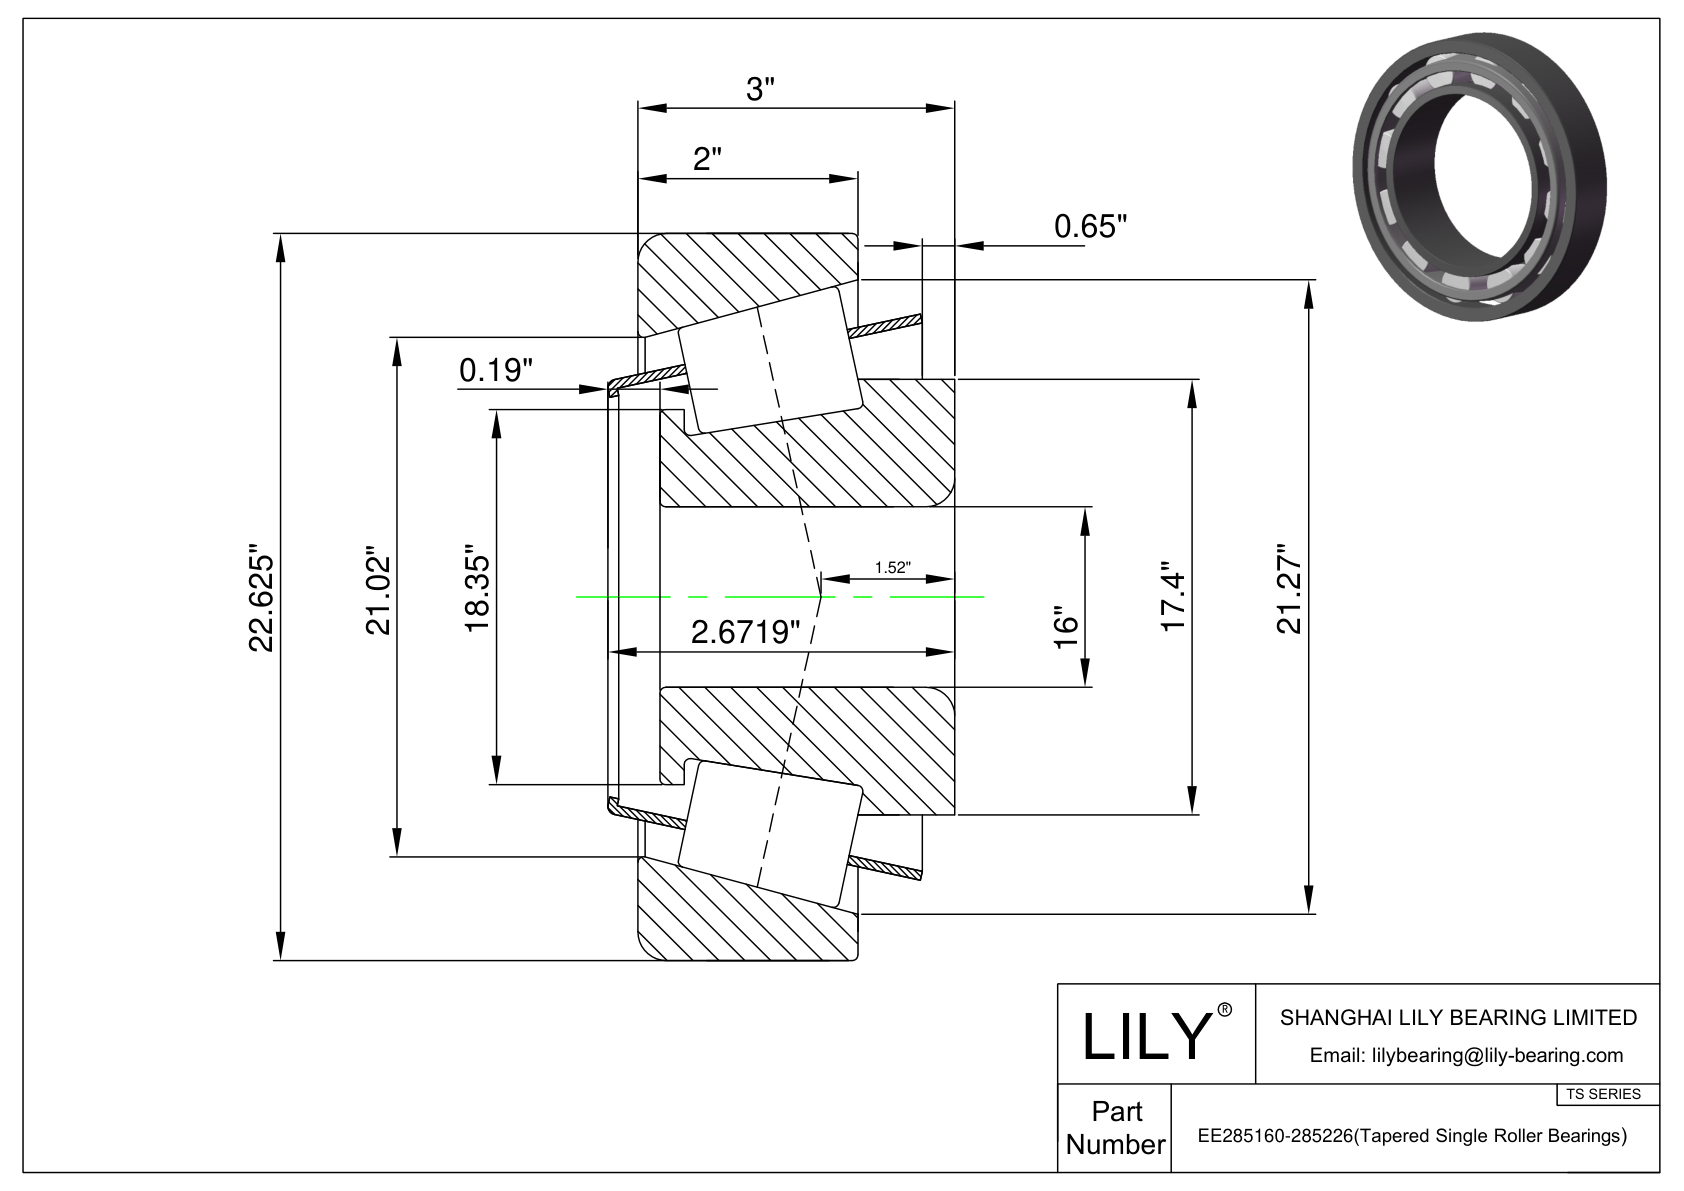 EE285160-285226 TS (Tapered Single Roller Bearings) (Imperial) cad drawing